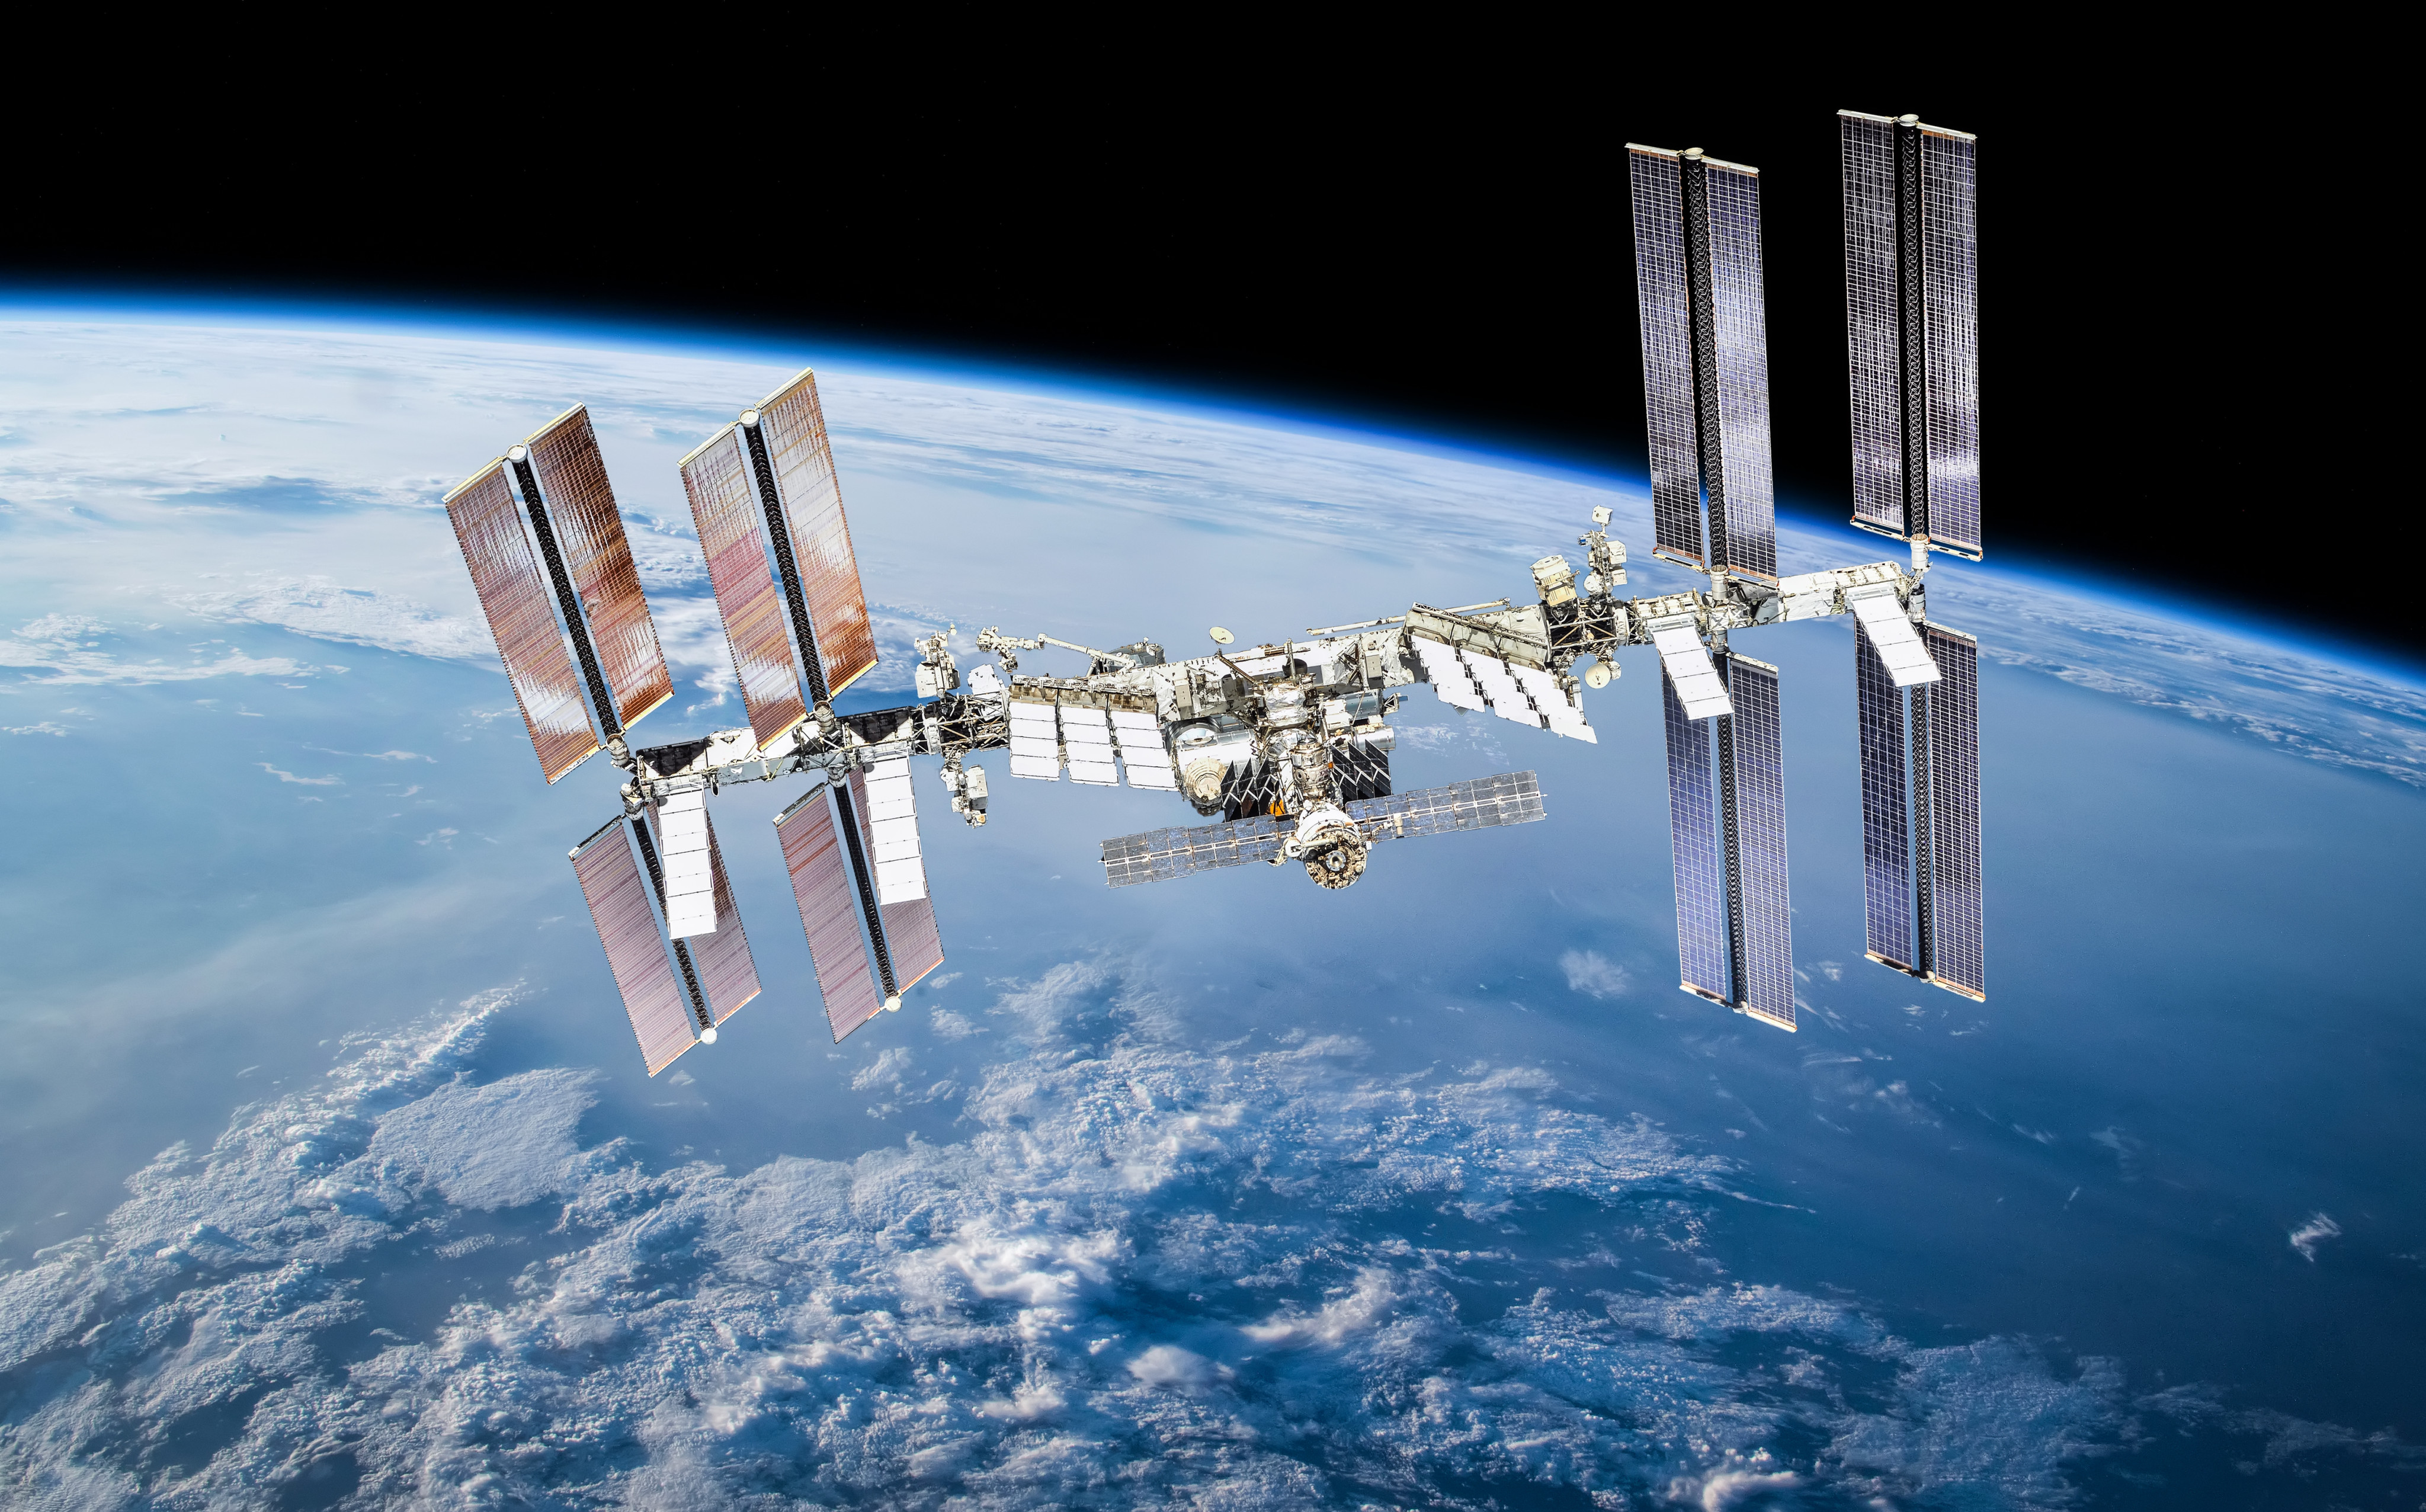 The International Space Station is the largest space station that has ever been built. Photo: Shutterstock